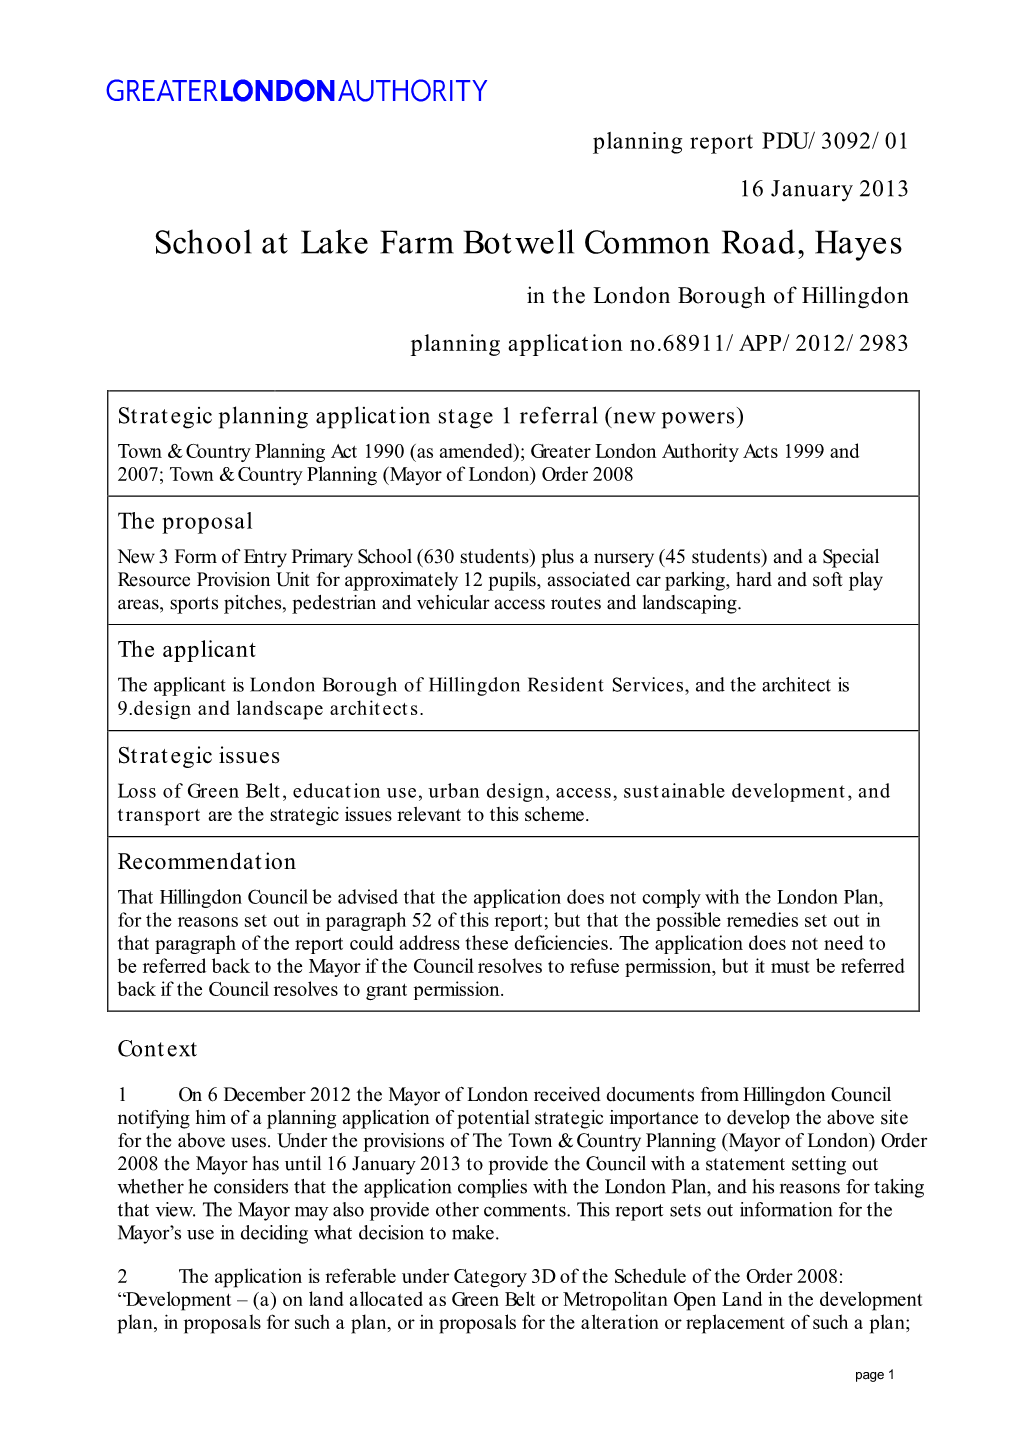 School at Lake Farm Botwell Common Road, Hayes in the London Borough of Hillingdon Planning Application No.68911/APP/2012/2983